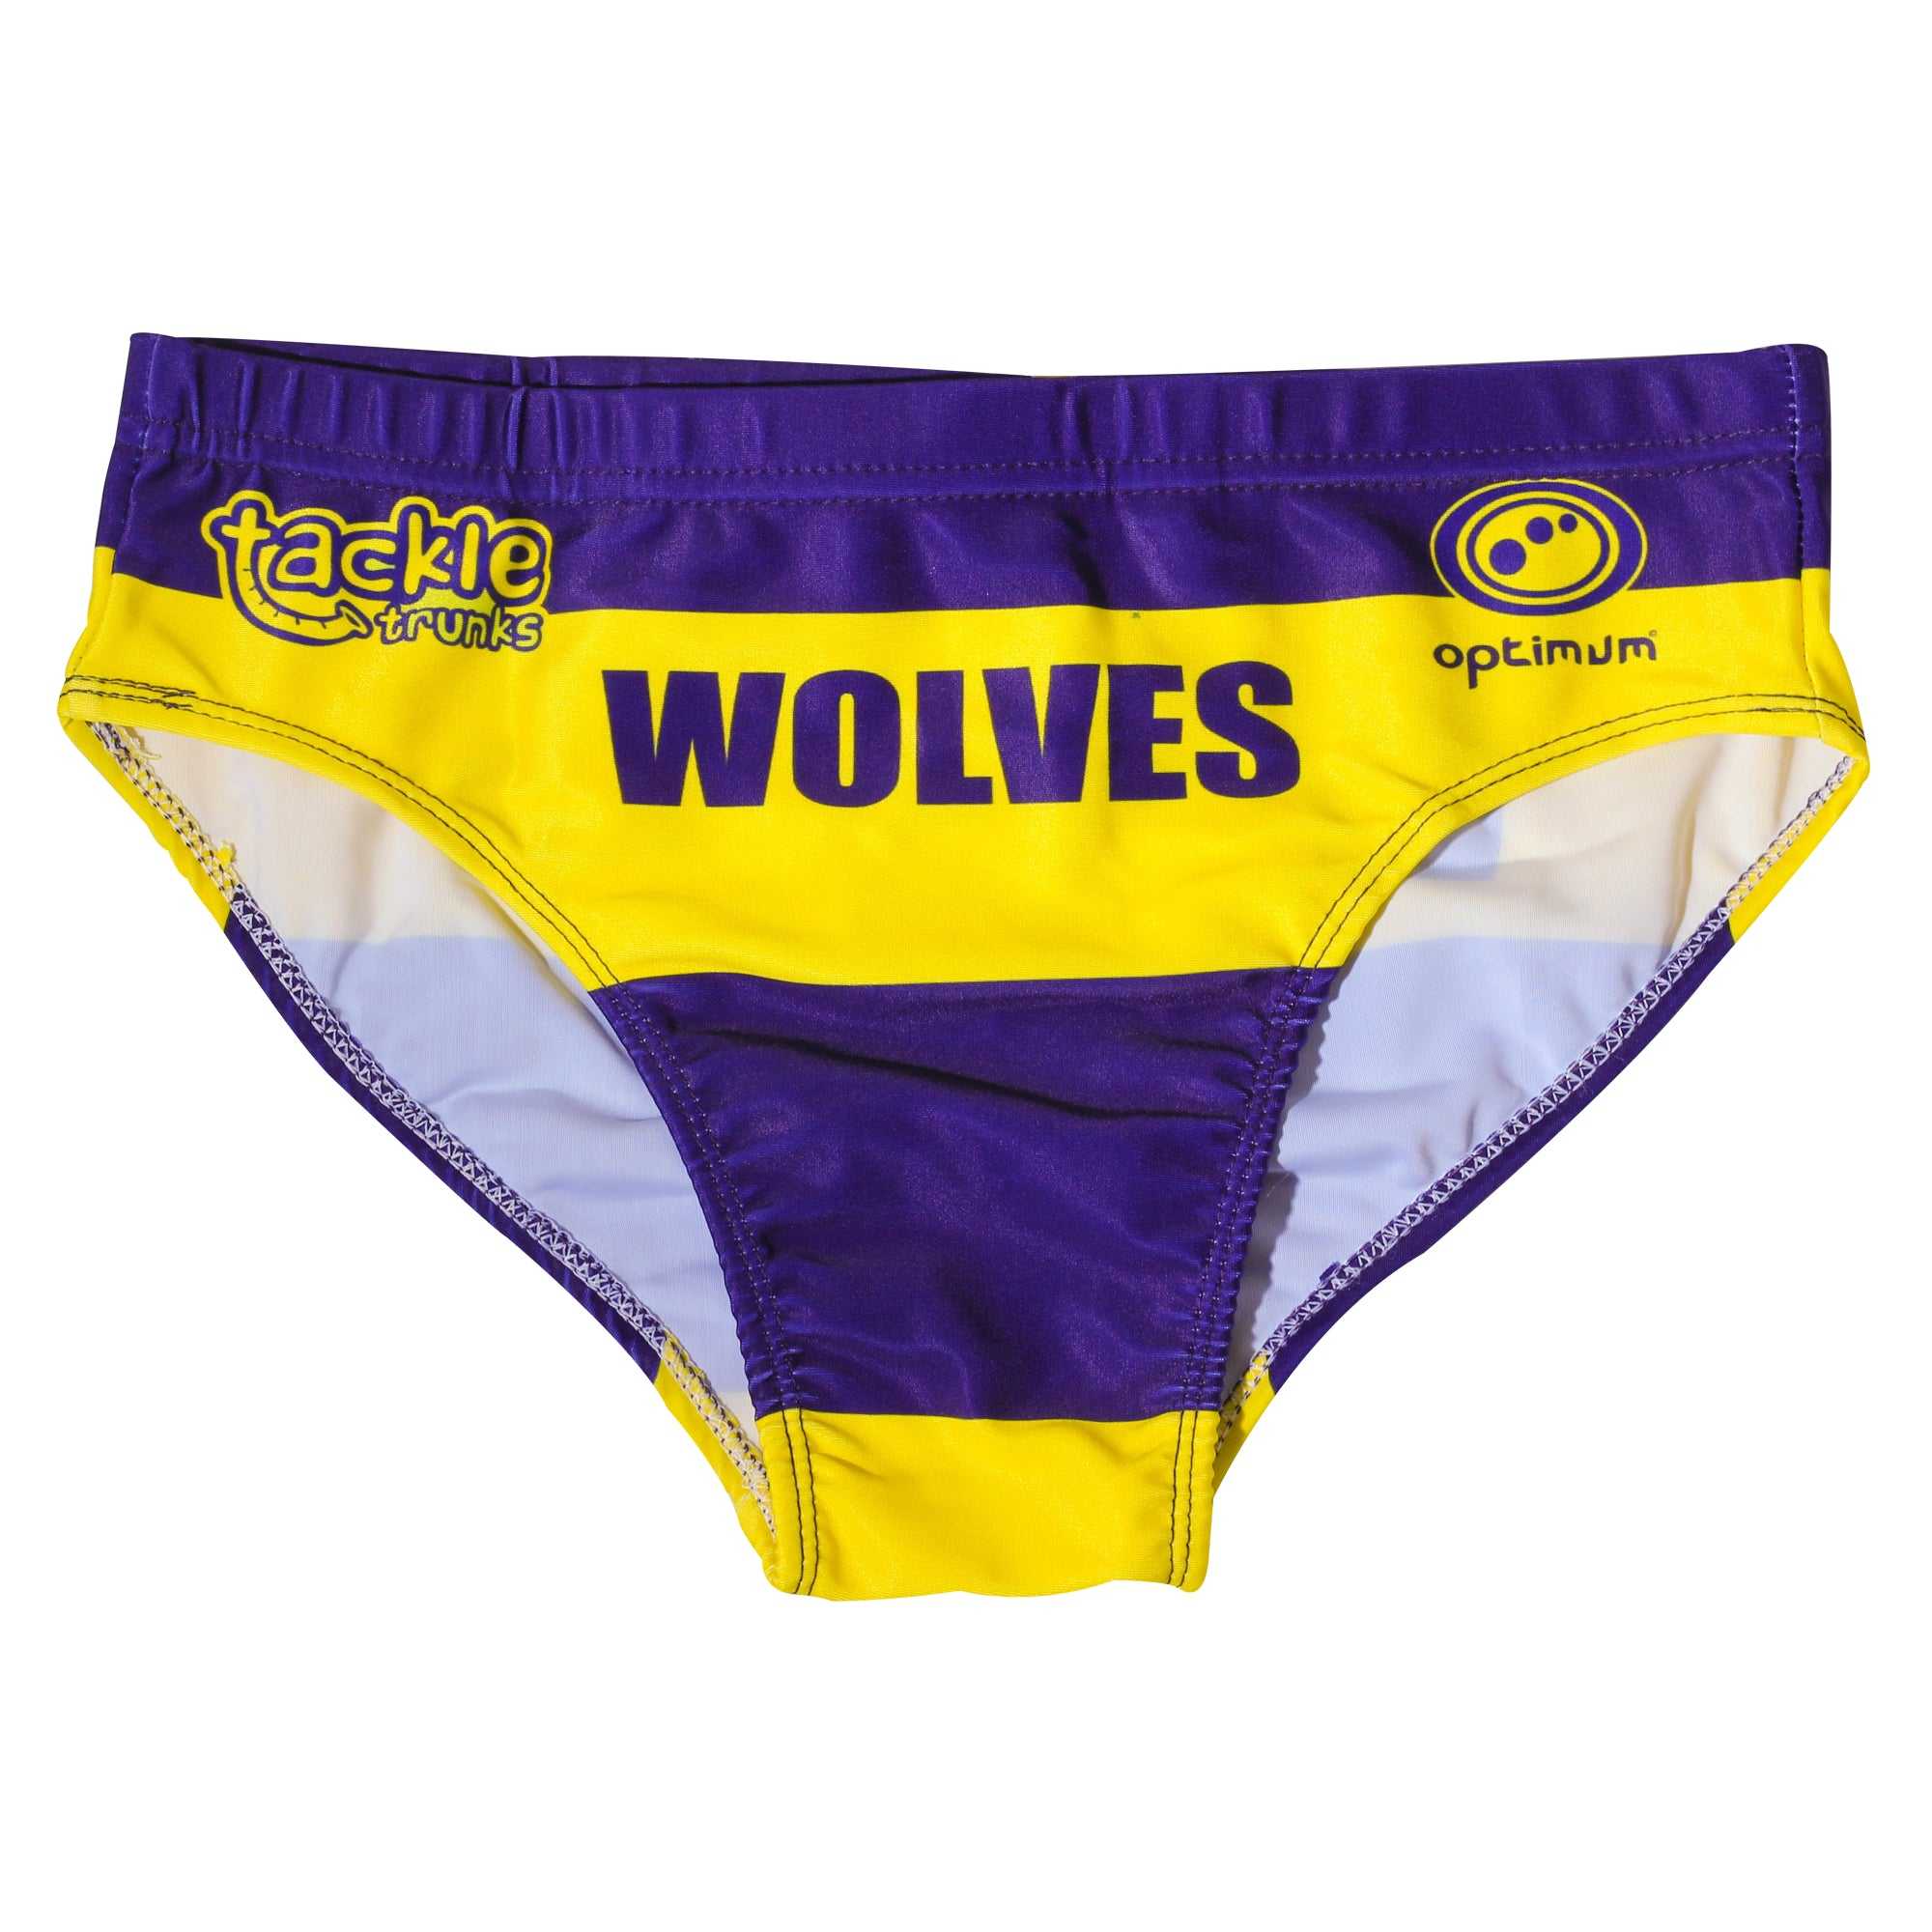 Wolves Tackle Trunks Rugby League - Optimum